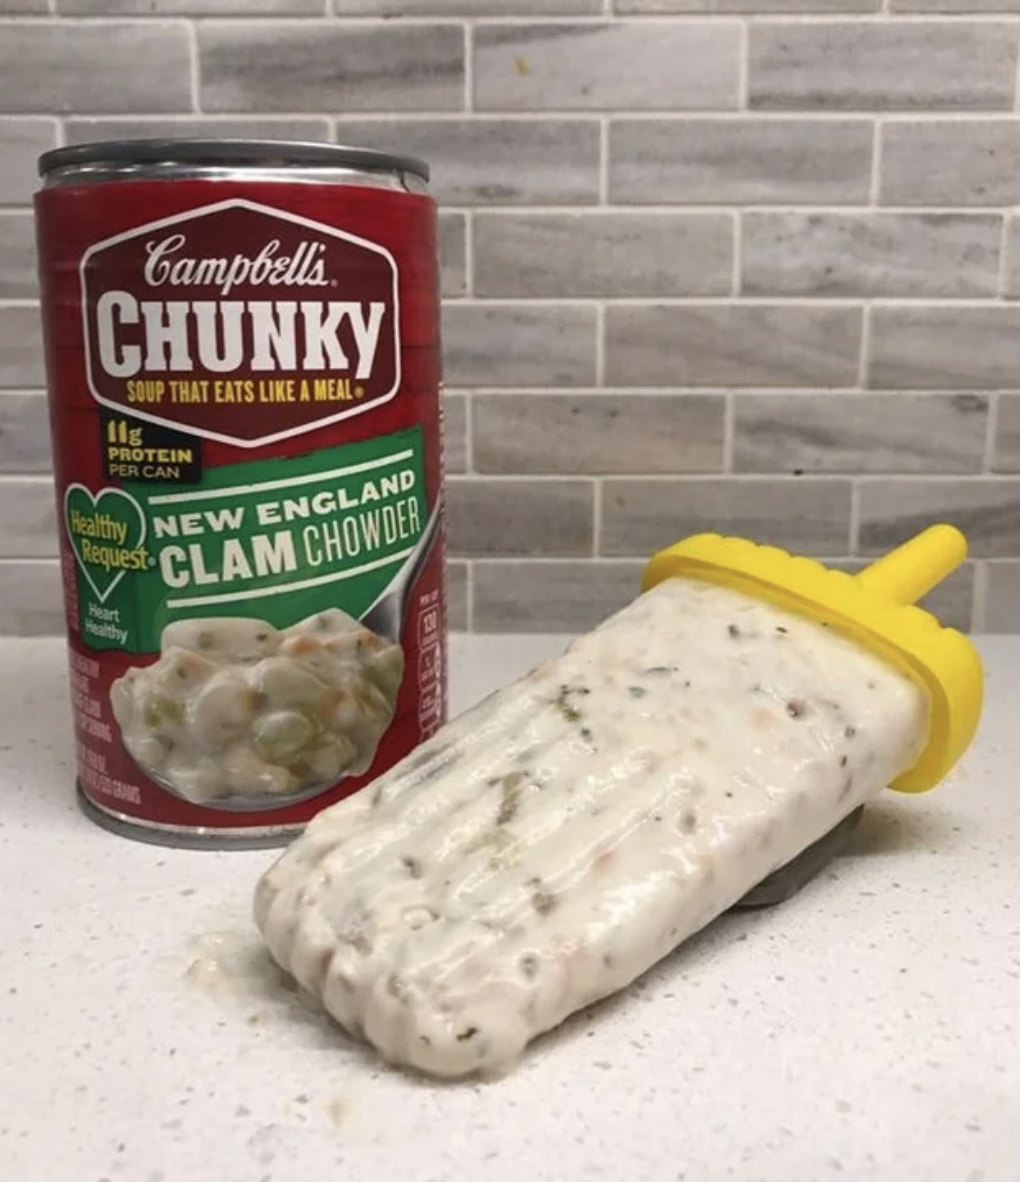 A photo of clam chowder popscicle.